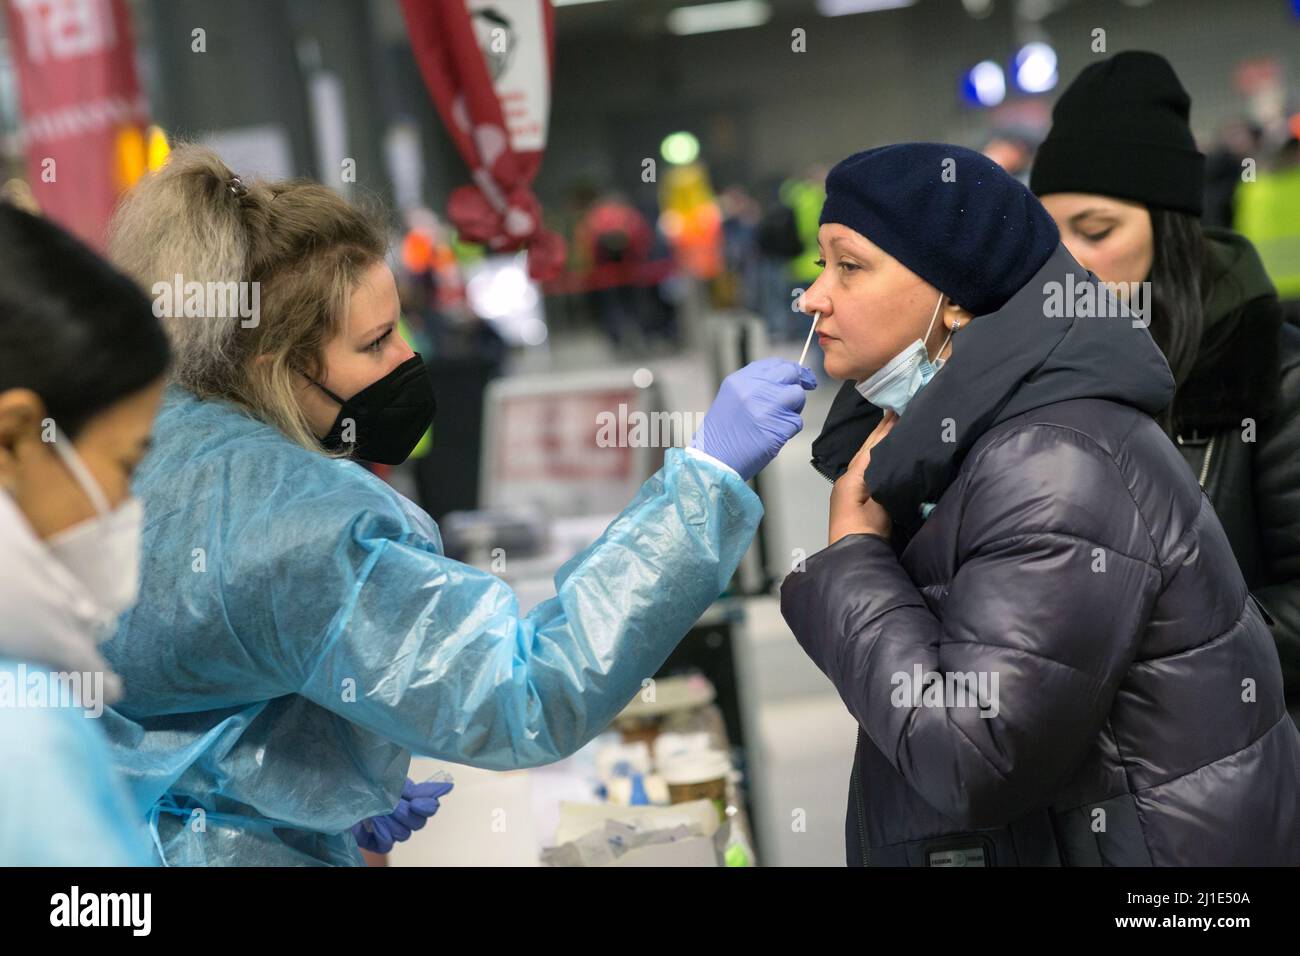 18.03.2022, Germany, Berlin, Berlin - Ukrainian war refugees arriving by train are taken care of by volunteers at the main station. A woman gets teste Stock Photo